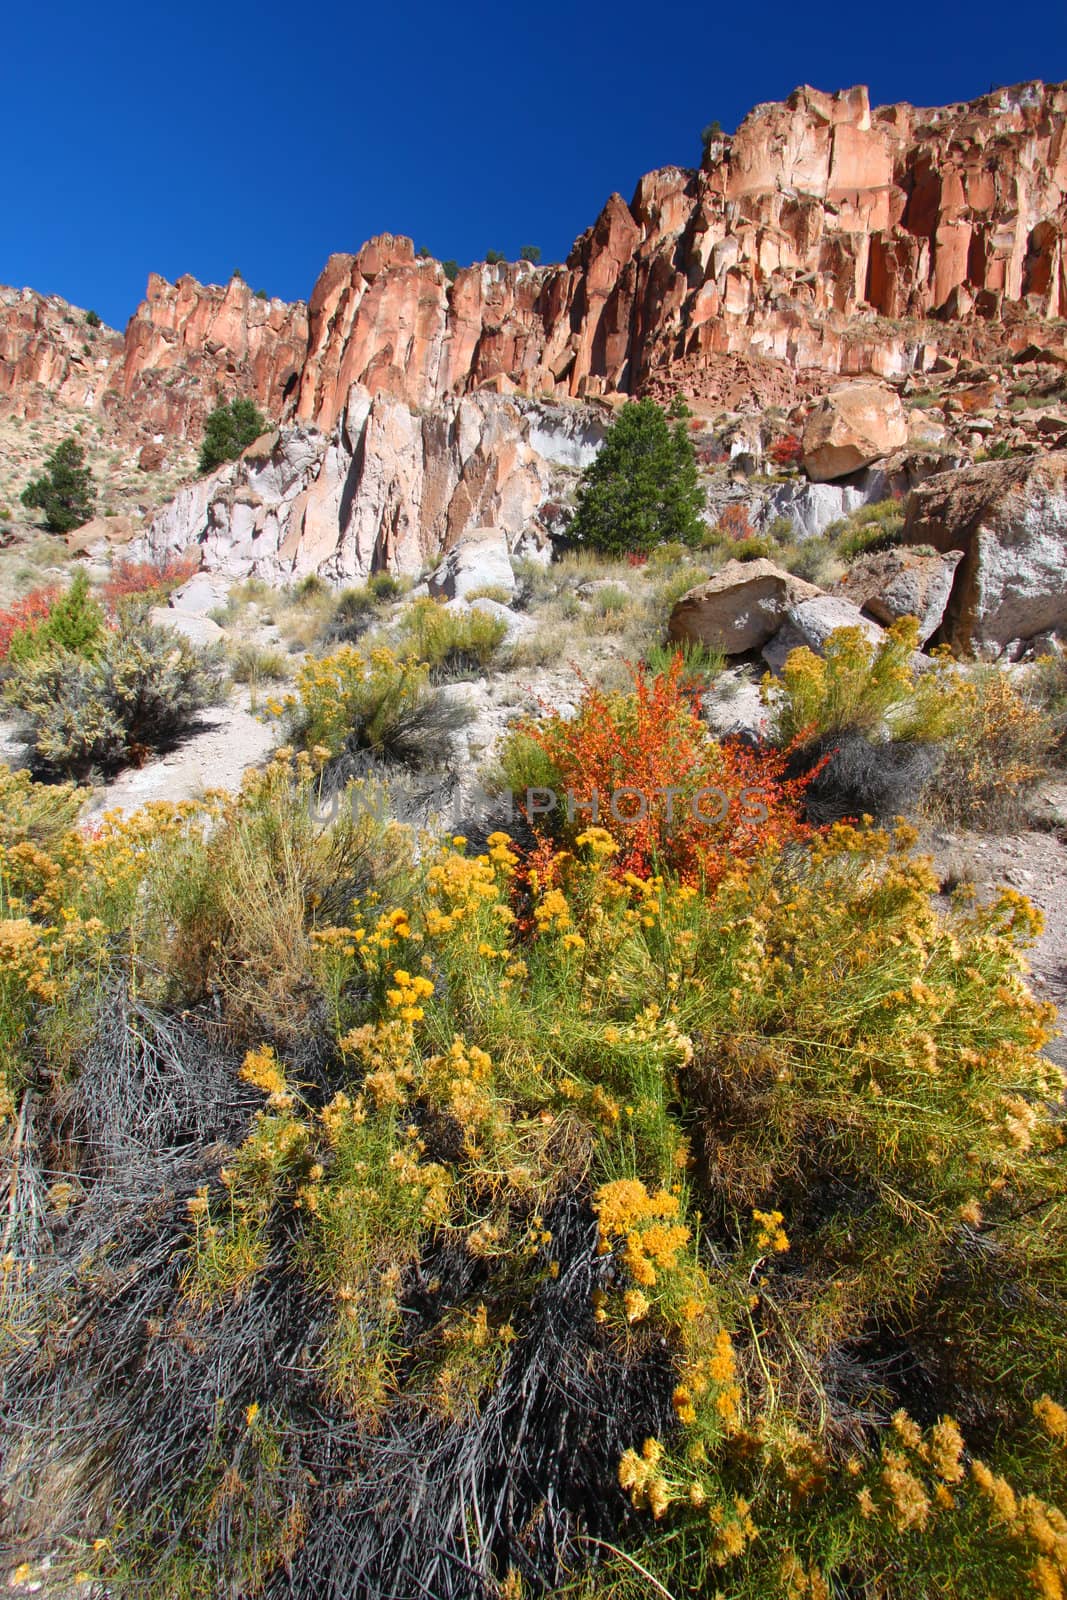 Rocky scenery and wildflowers at Fremont Indian State Park of Utah.